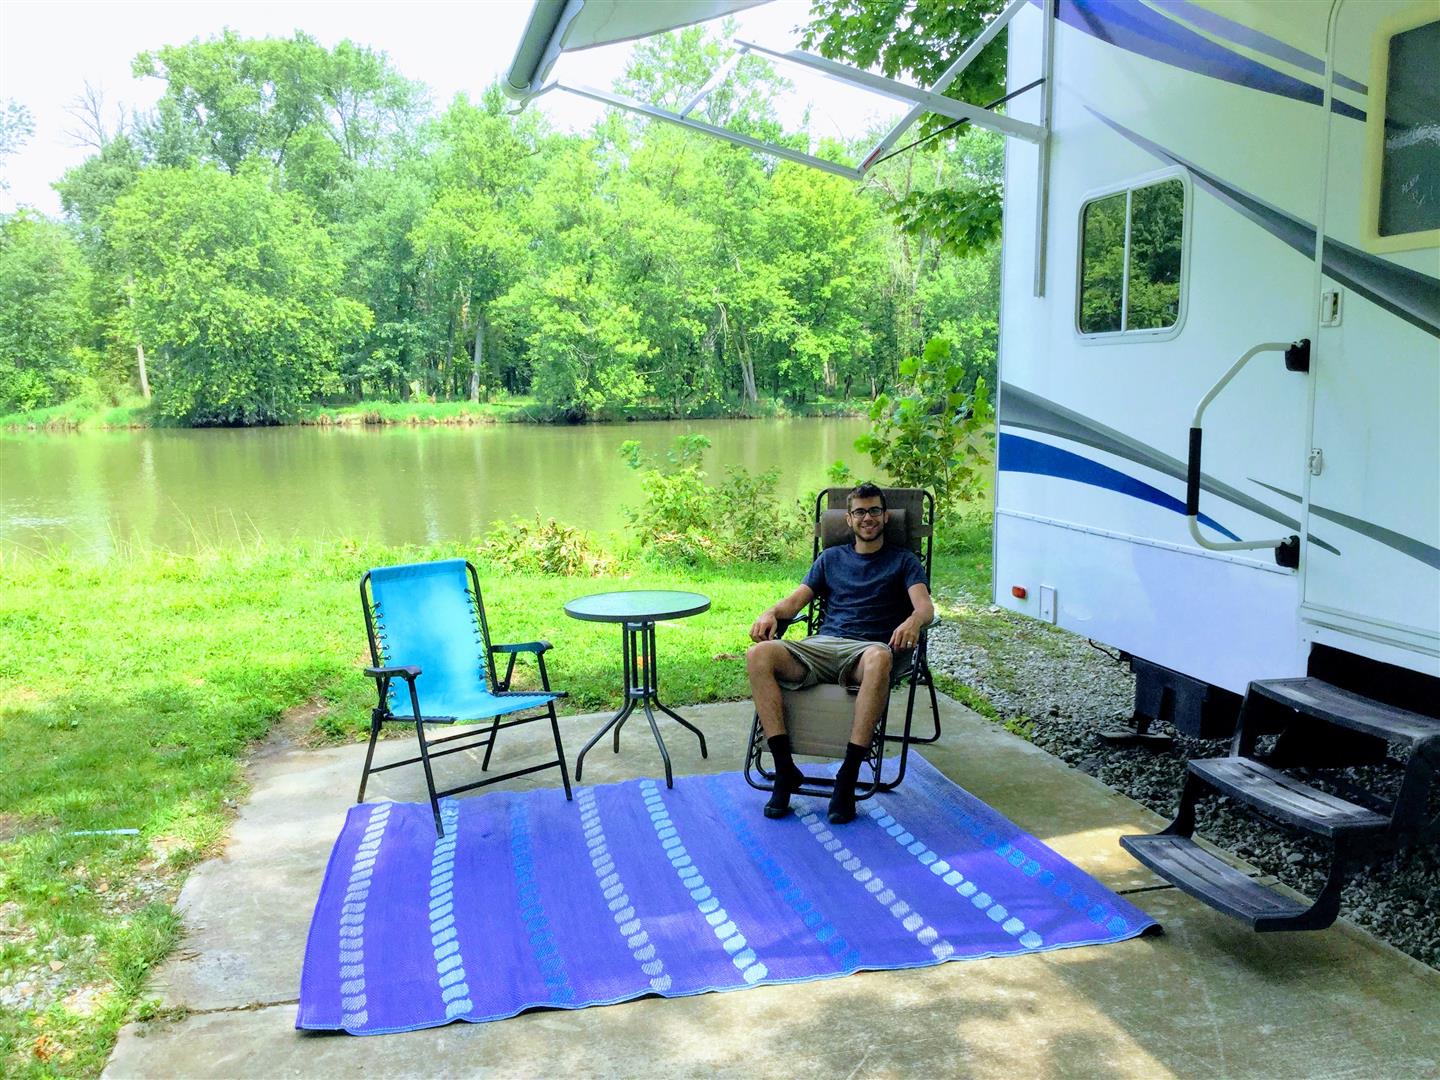 Camping for RV Patio Carry Bag and Rug Stakes Included 9 x 12 Black and White Weather Resistant Basics Outdoor Mat